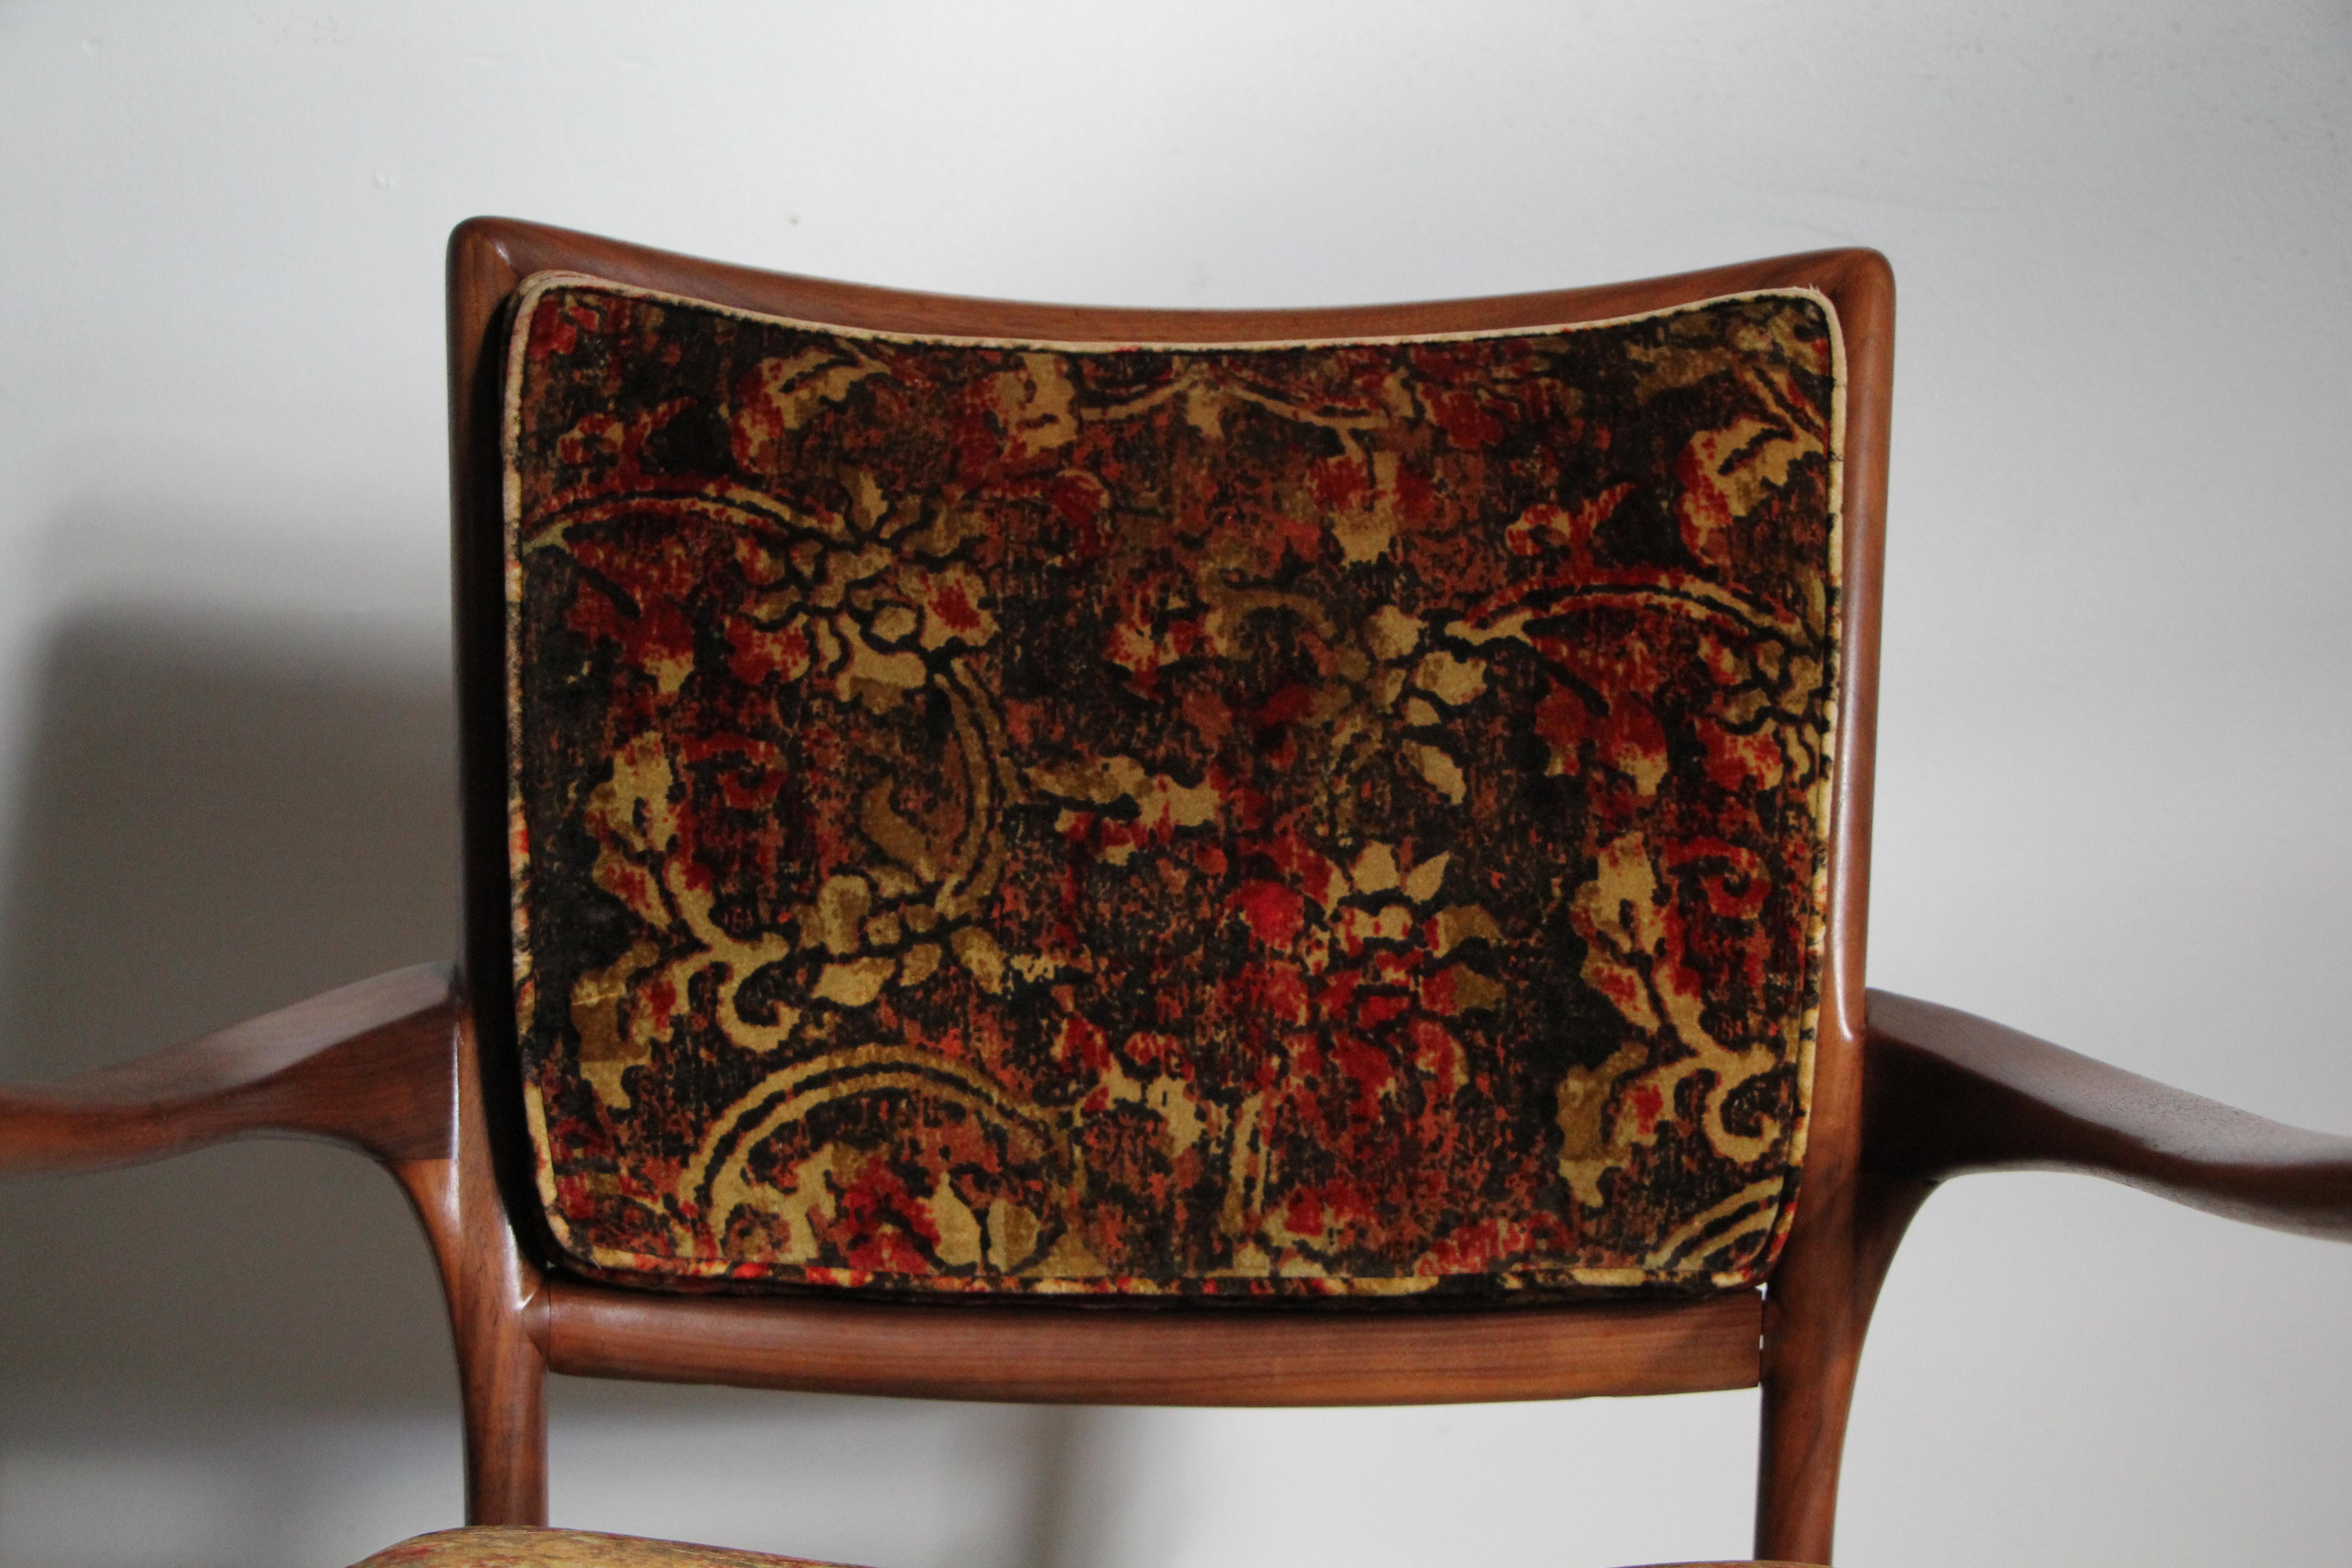 Very Rare Model 175-C Sculptured Lounge Armchair by Vladimir Kagan, c 1950s For Sale 2